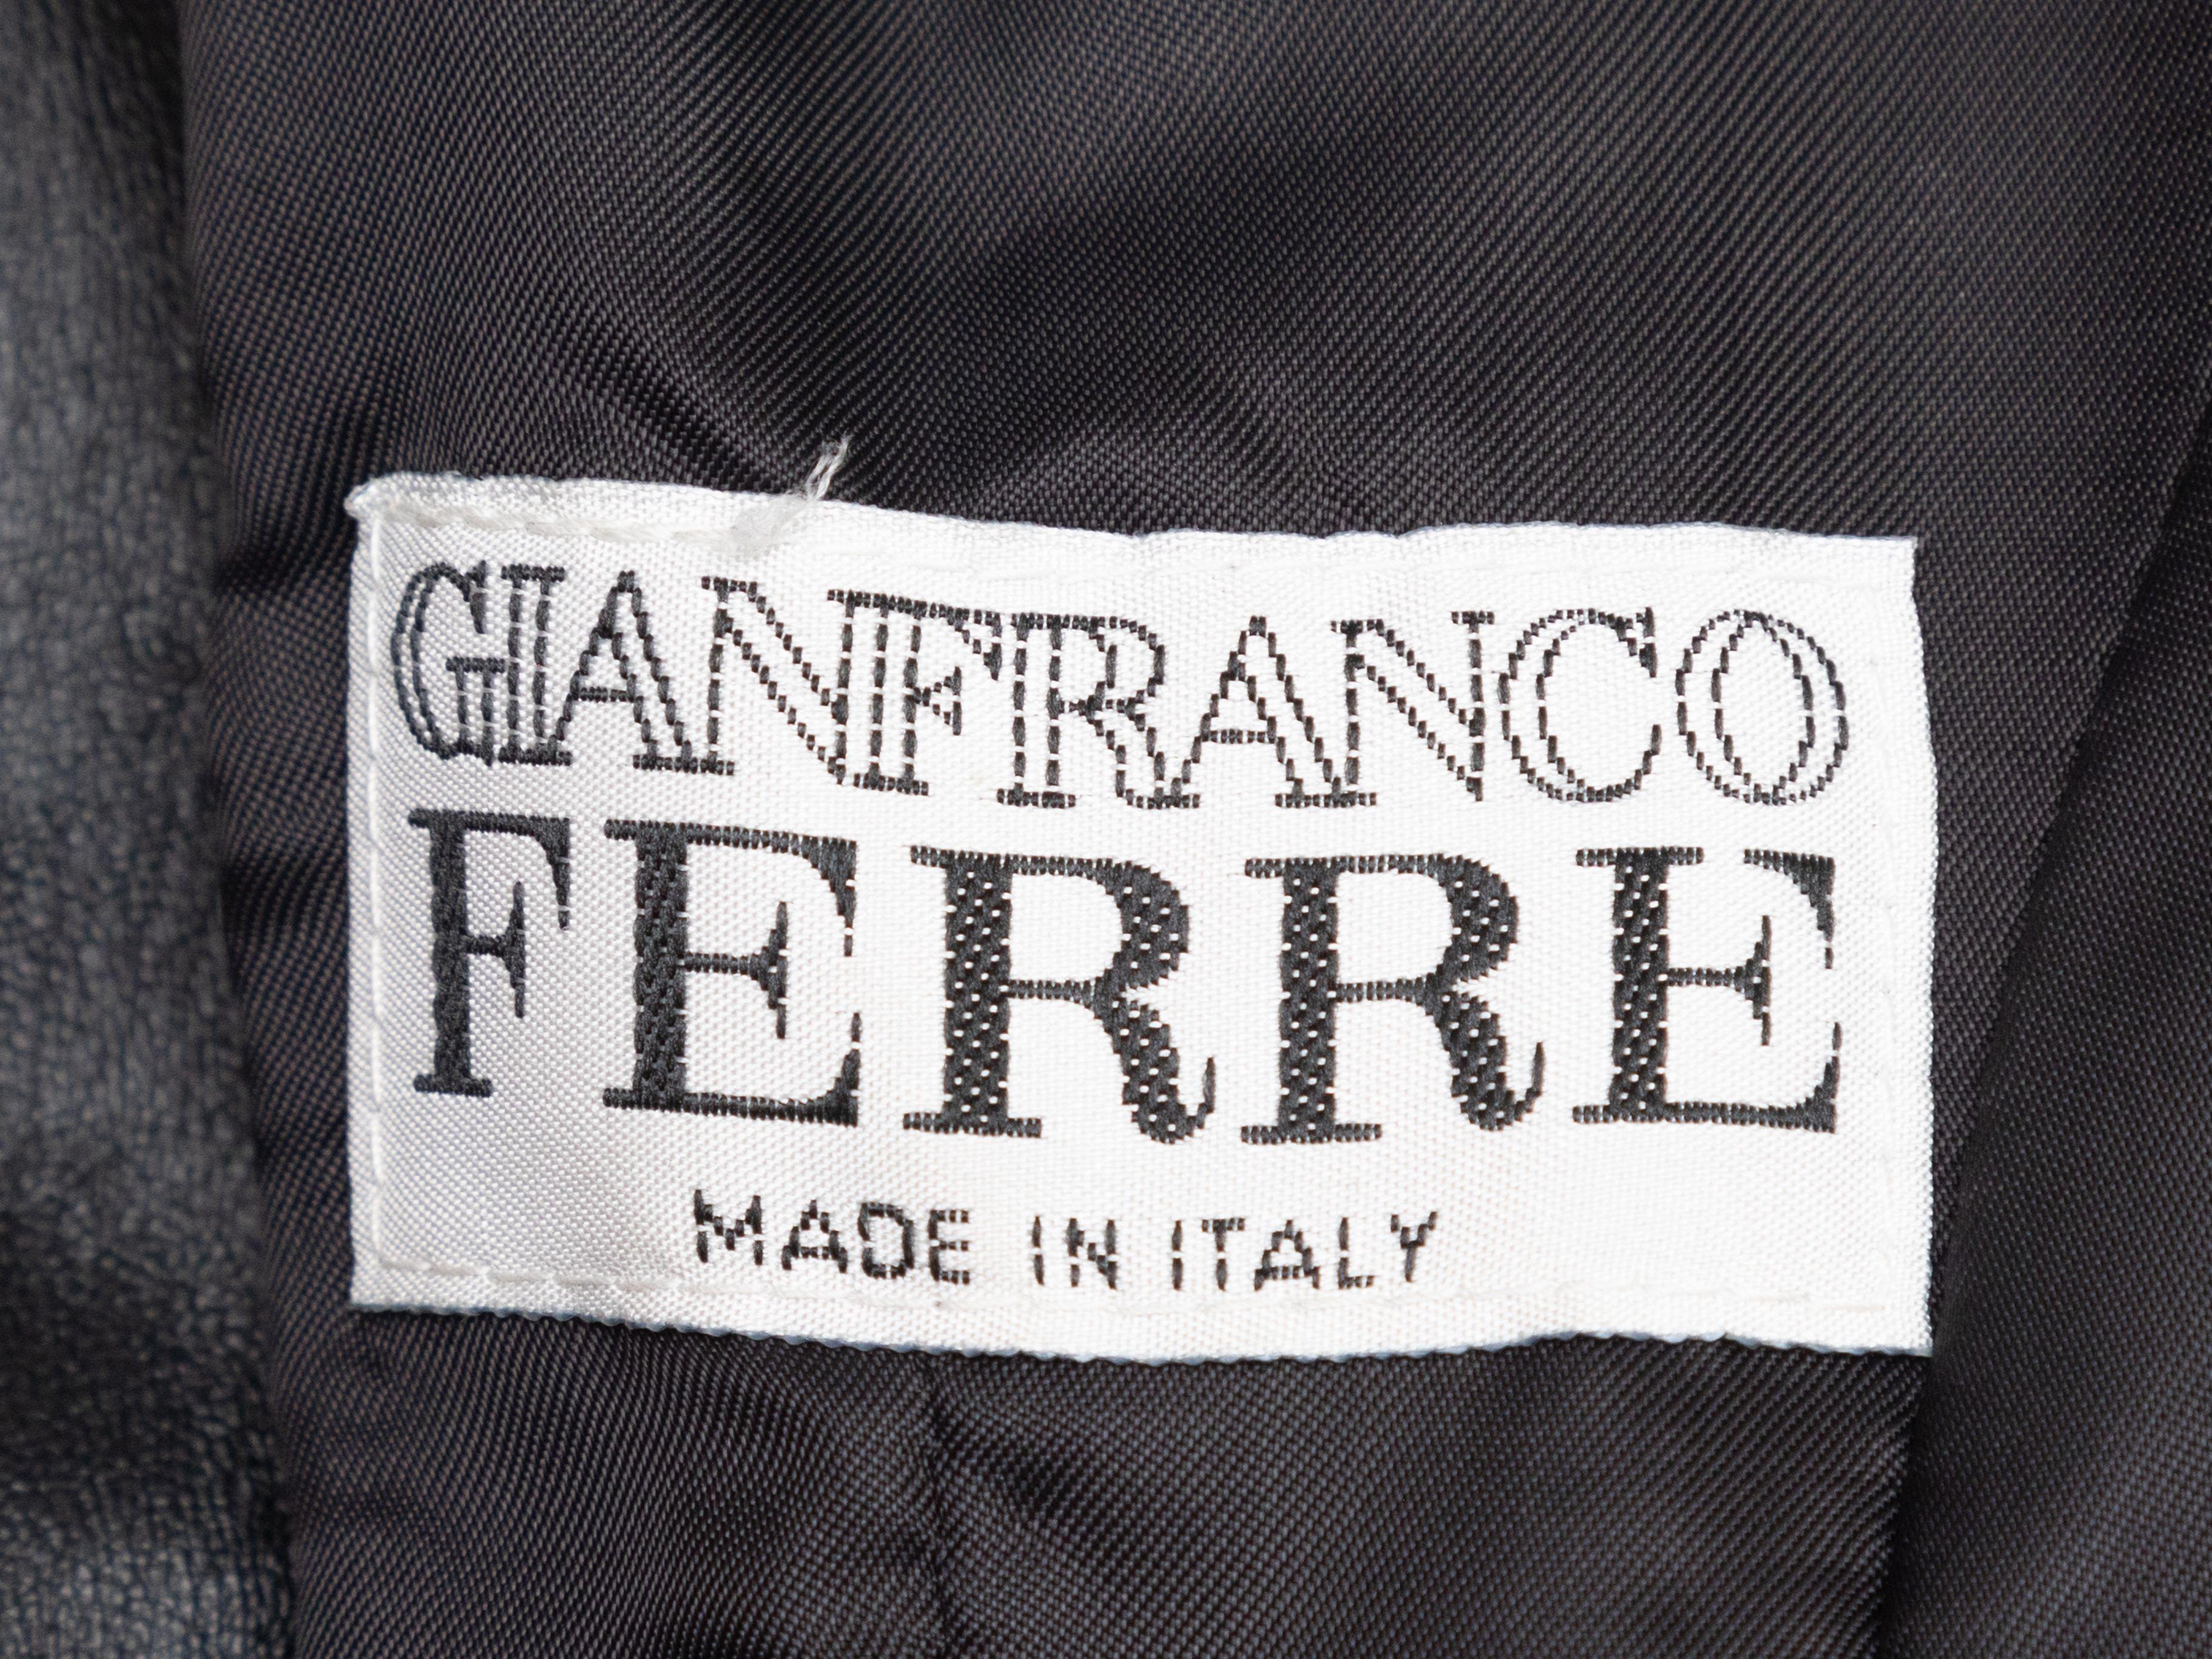 Product Details: Black leather blazer by Gianfranco Ferre. Notched lapel. Dual hip pockets. Lace-up detailing at sides and at sleeves. Button closures at front. 36